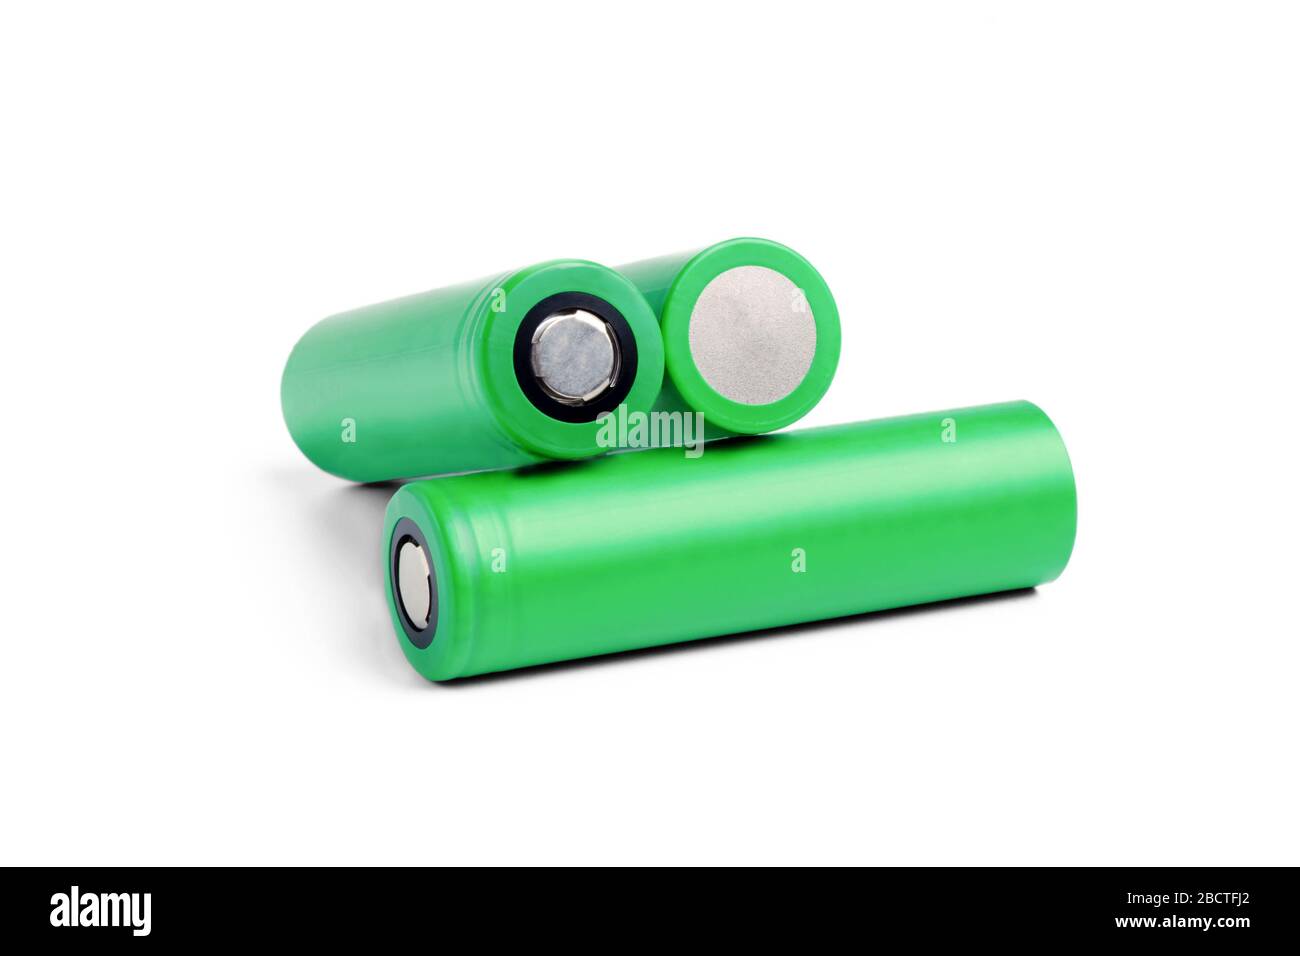 https://c8.alamy.com/comp/2BCTFJ2/18650-rechargeable-lithium-ion-batteries-isolated-on-a-white-background-batteries-for-flashlights-vapes-electronic-cigarettes-laptops-2BCTFJ2.jpg